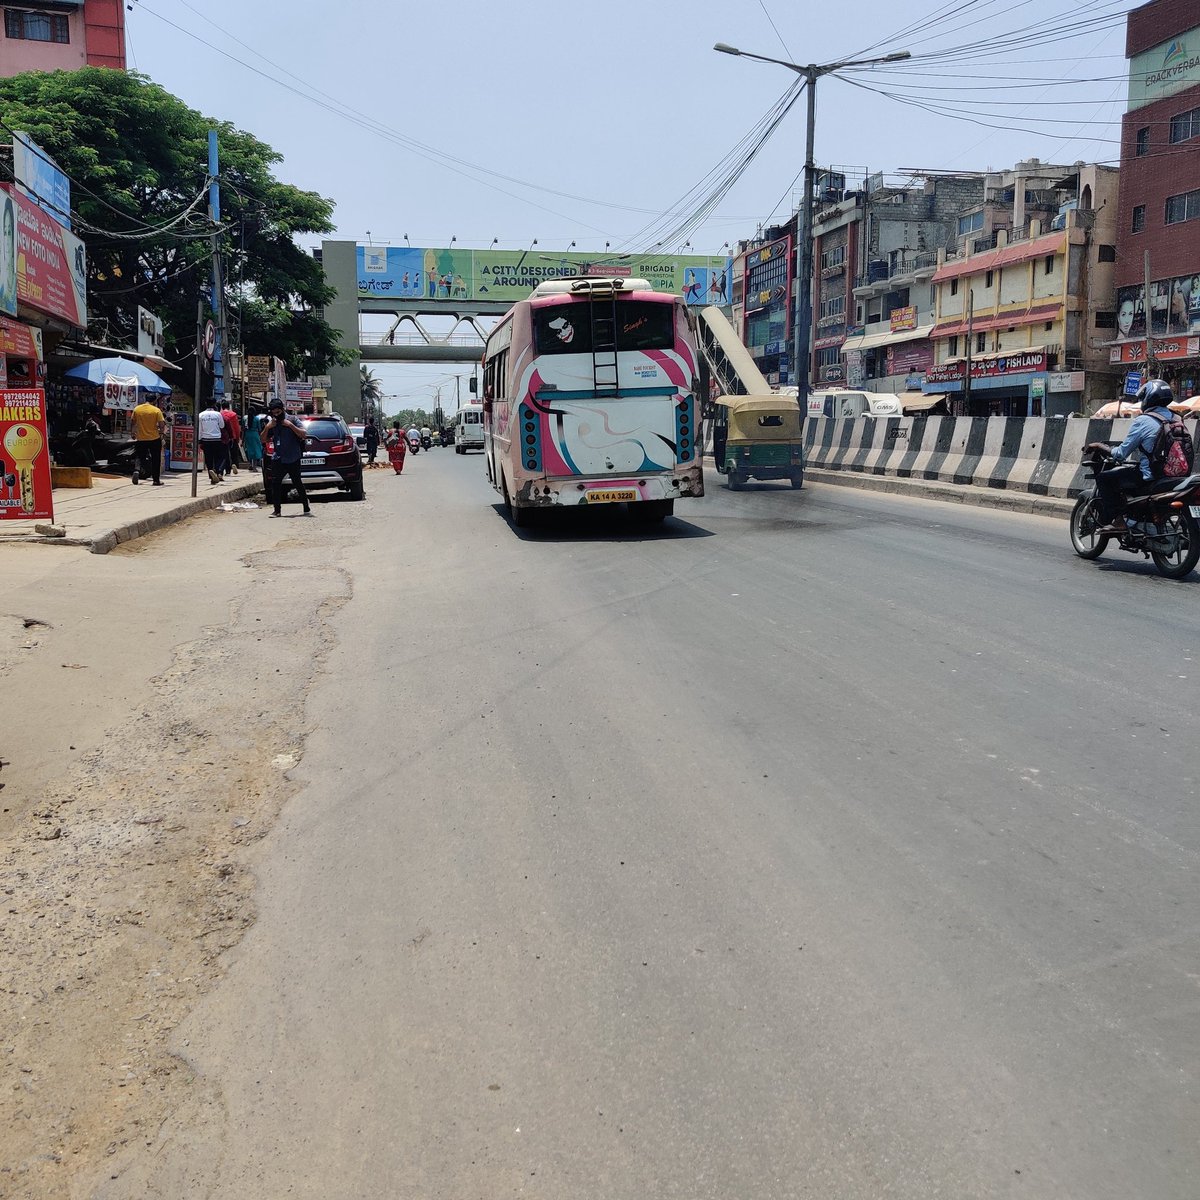 While I was clicking pictures of the opposite side, I saw a van stopping at the bus stop towards Majestic. He took off before I could speak to the 'conductor', but the guy waiting to go to Majestic got on to this bus. The conductor didn't seem keen to take me on board  (4/n)